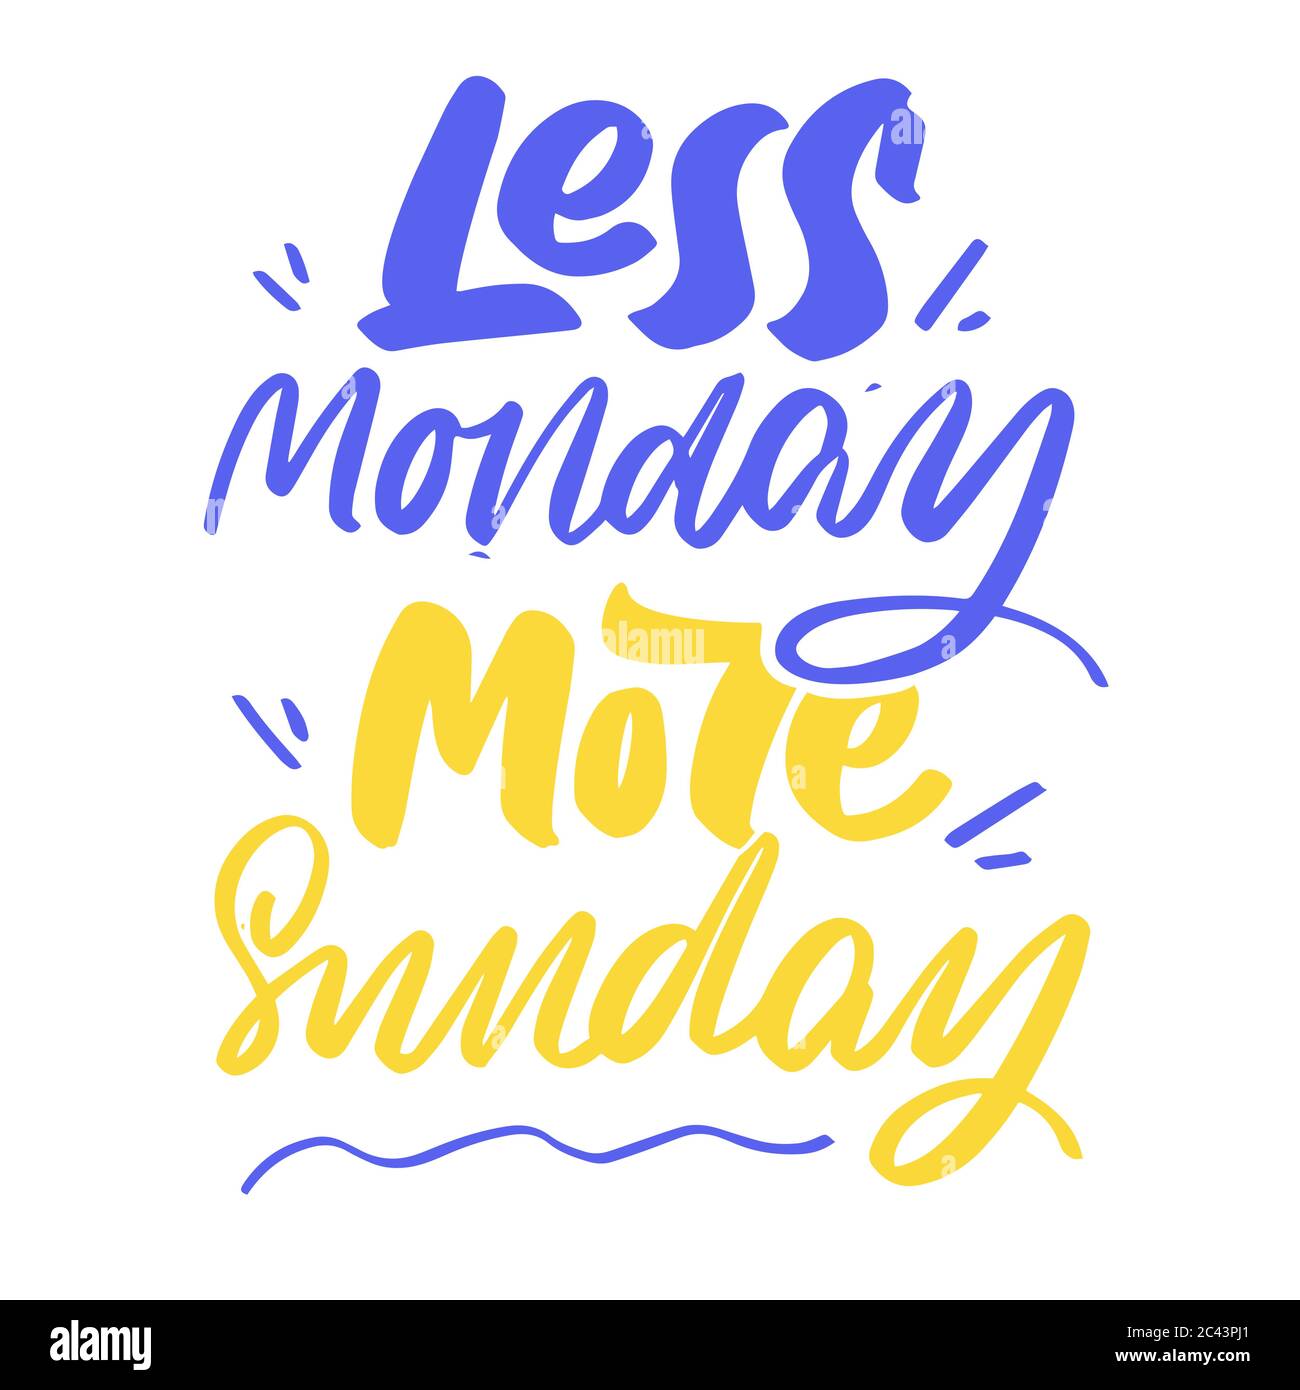 Less monday, more sunday. Vector hand lettering Stock Vector